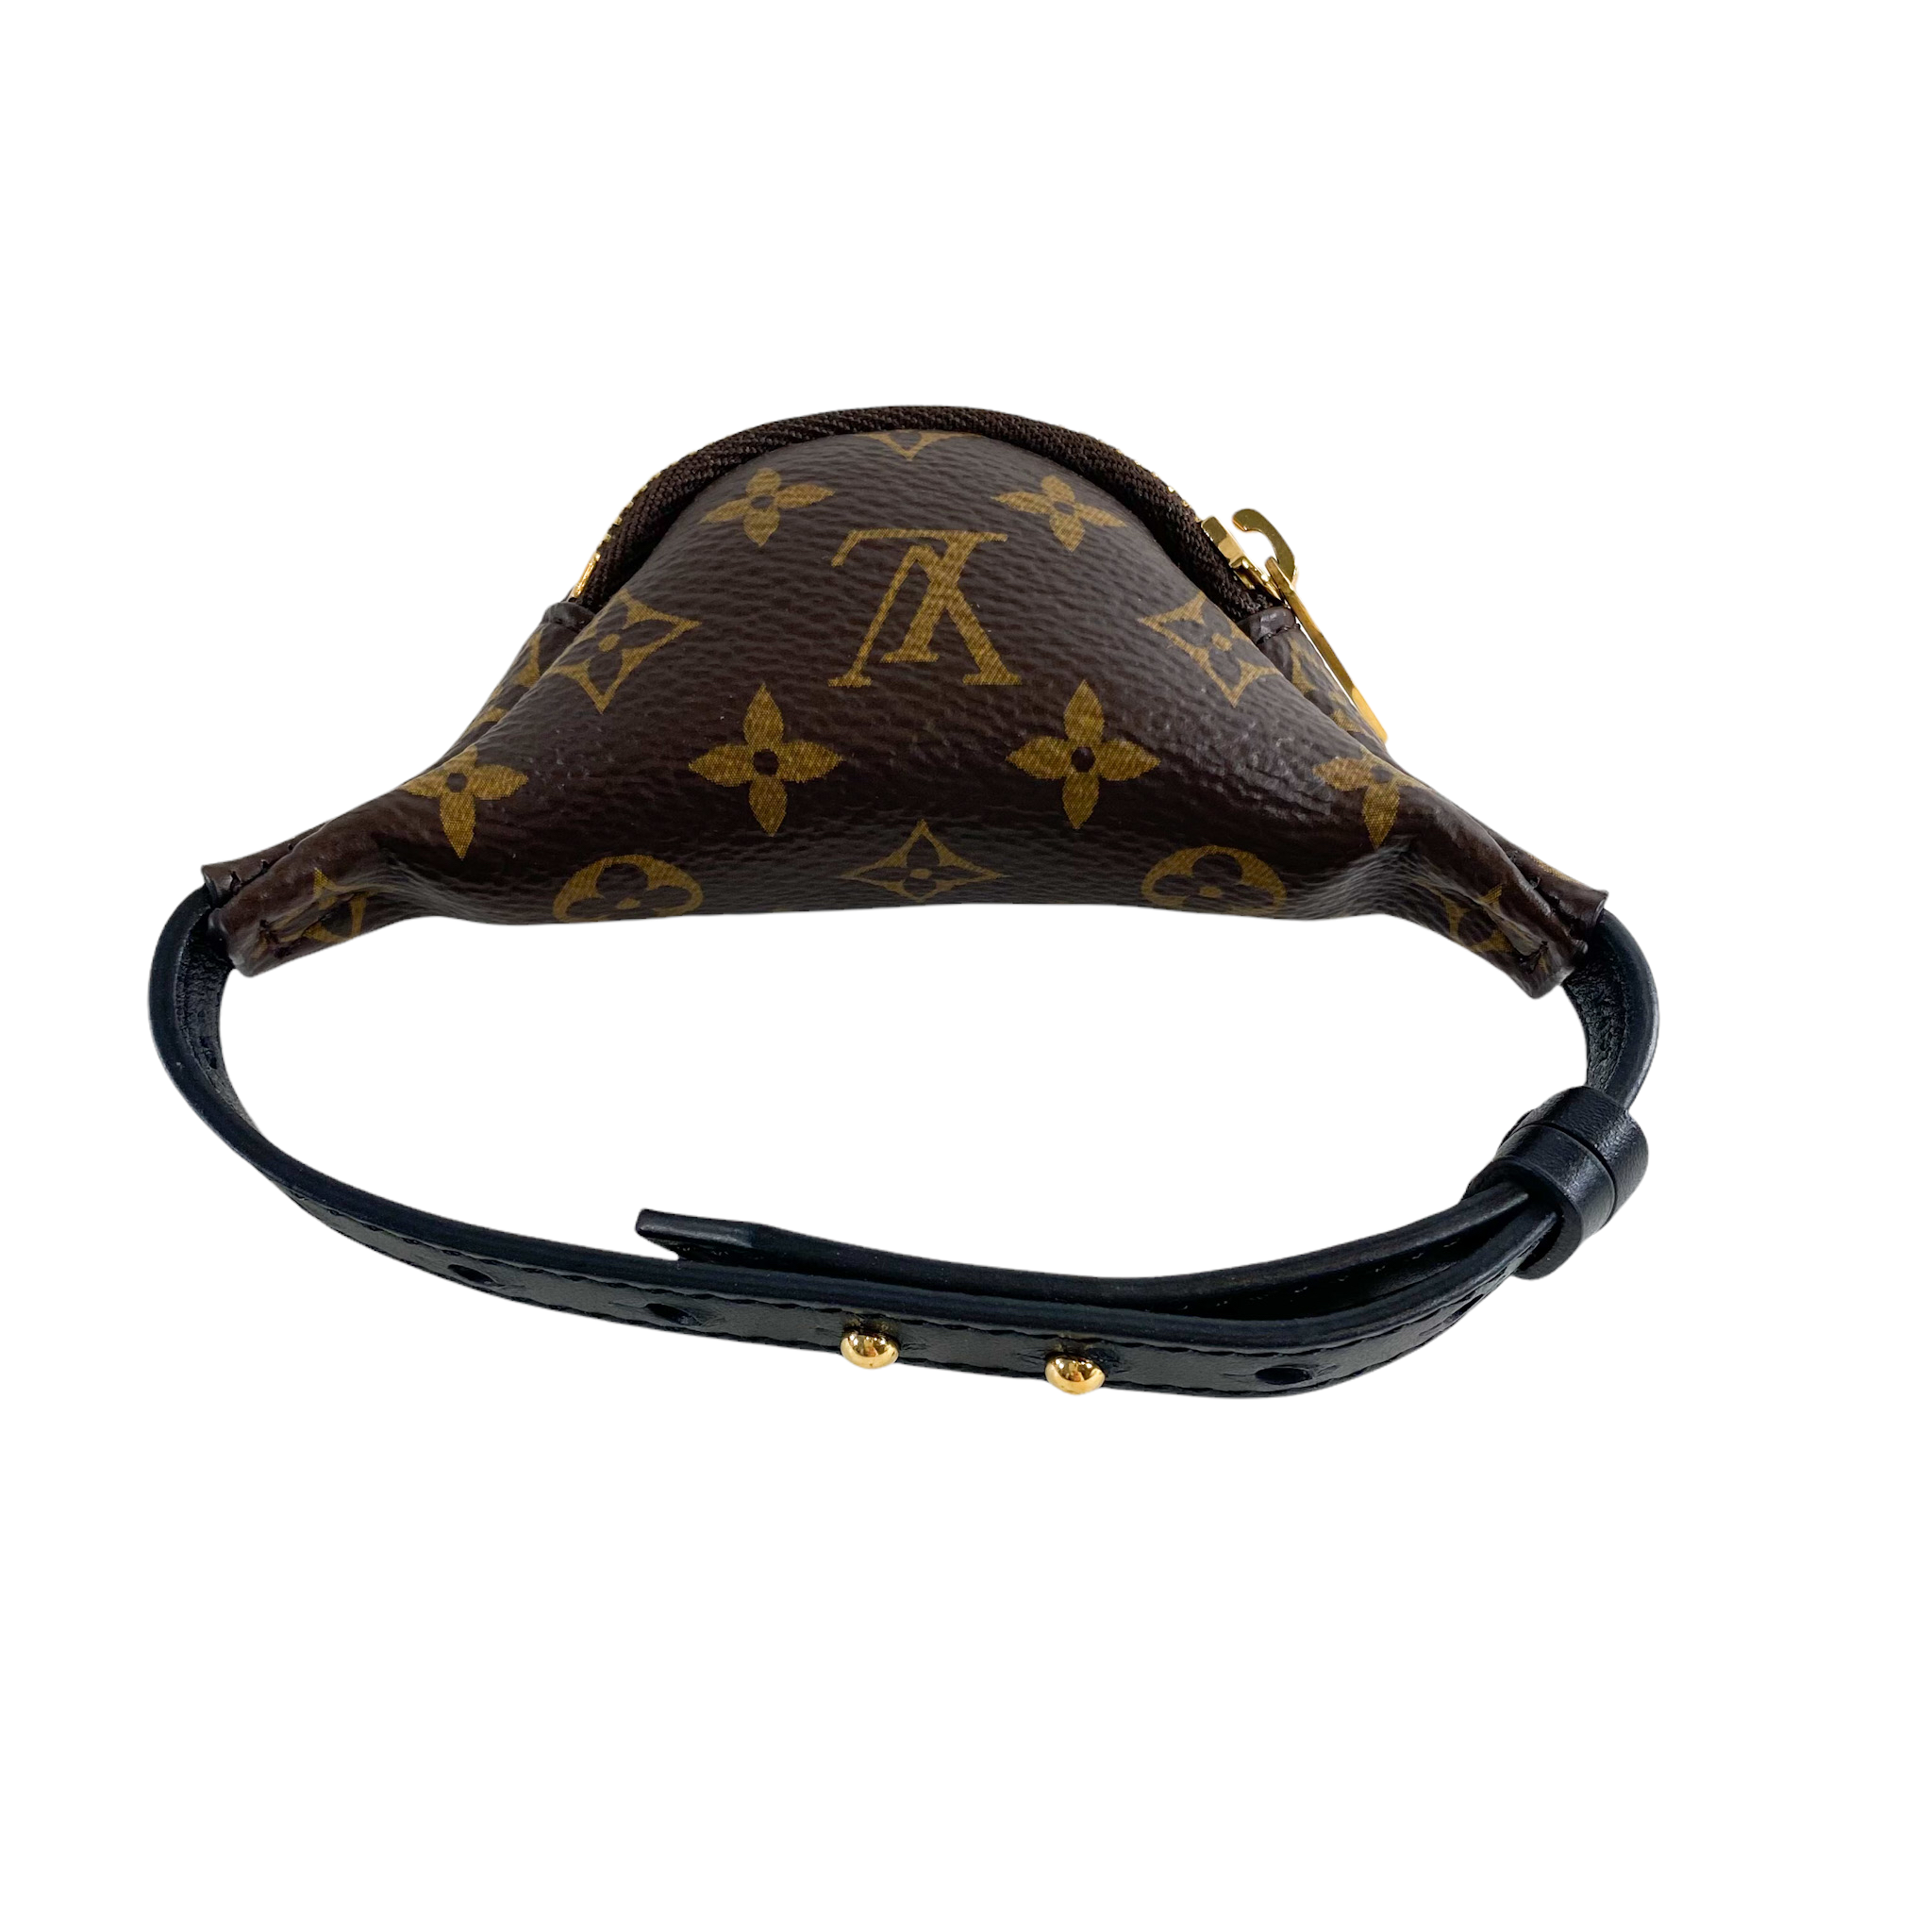 Louis Vuitton Cruise 2020 Backpack & Bumbag Party Bracelets - BAGAHOLICBOY